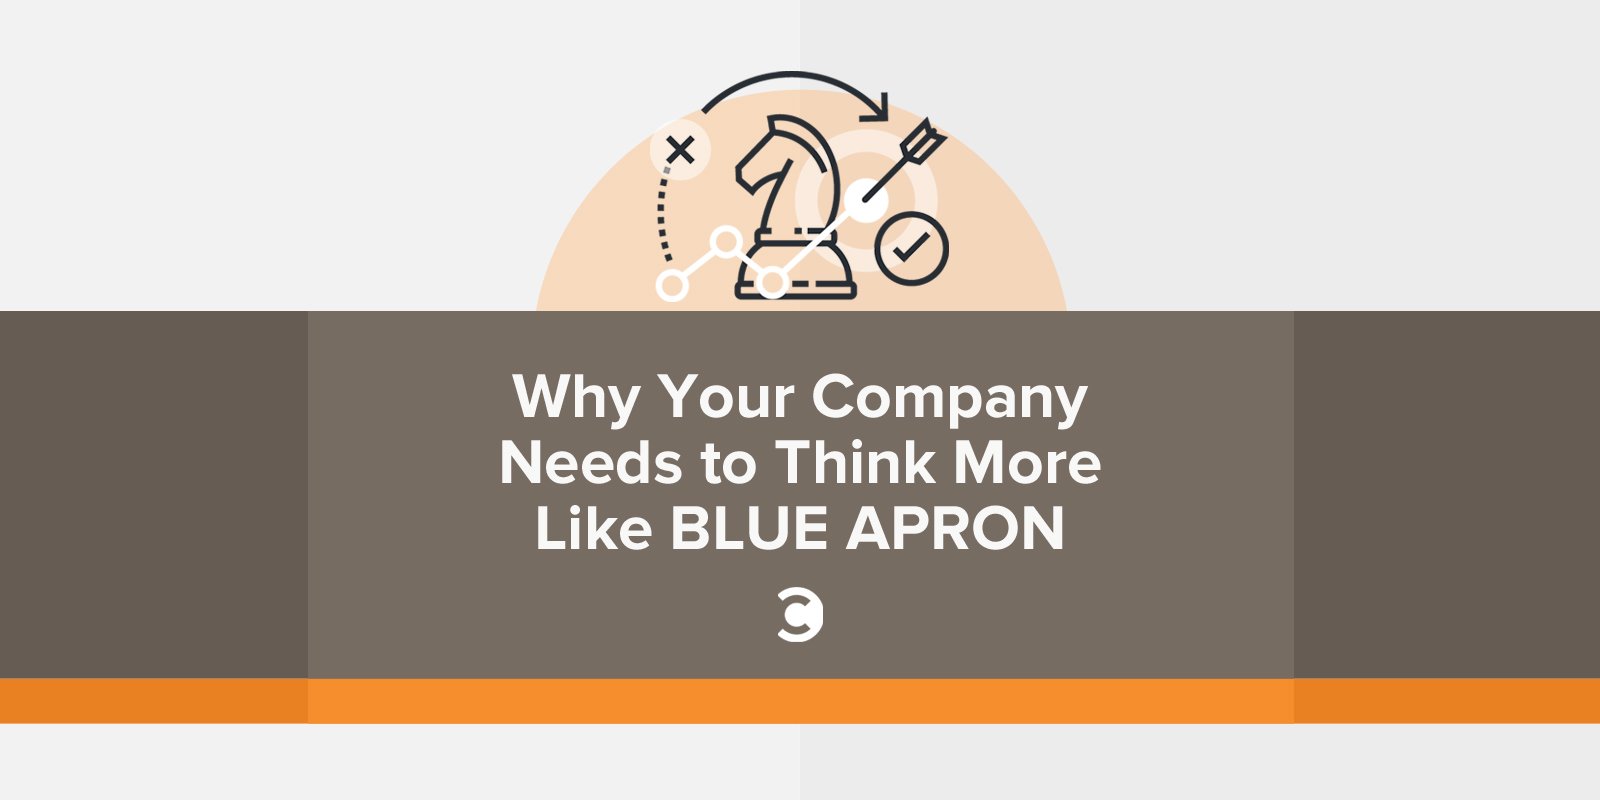 Why Your Company Needs to Think More Like Blue Apron